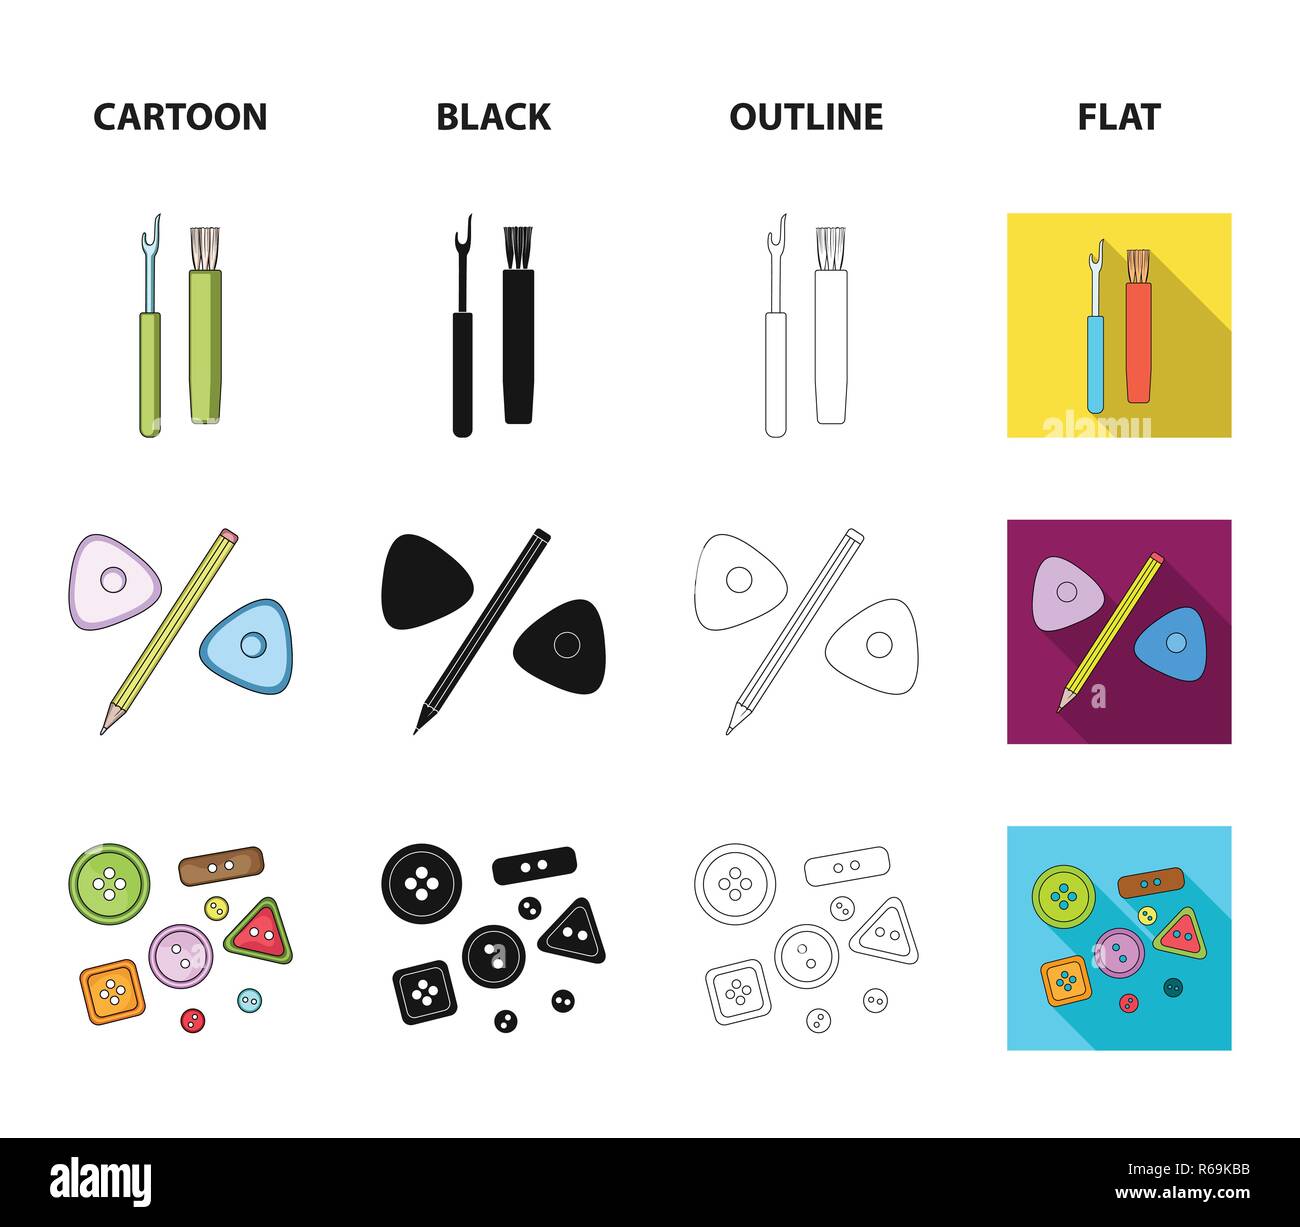 https://c8.alamy.com/comp/R69KBB/measuring-tape-needles-crayons-and-pencilsewing-or-tailoring-tools-set-collection-icons-in-cartoonblackoutlineflat-style-vector-symbol-stock-ill-R69KBB.jpg